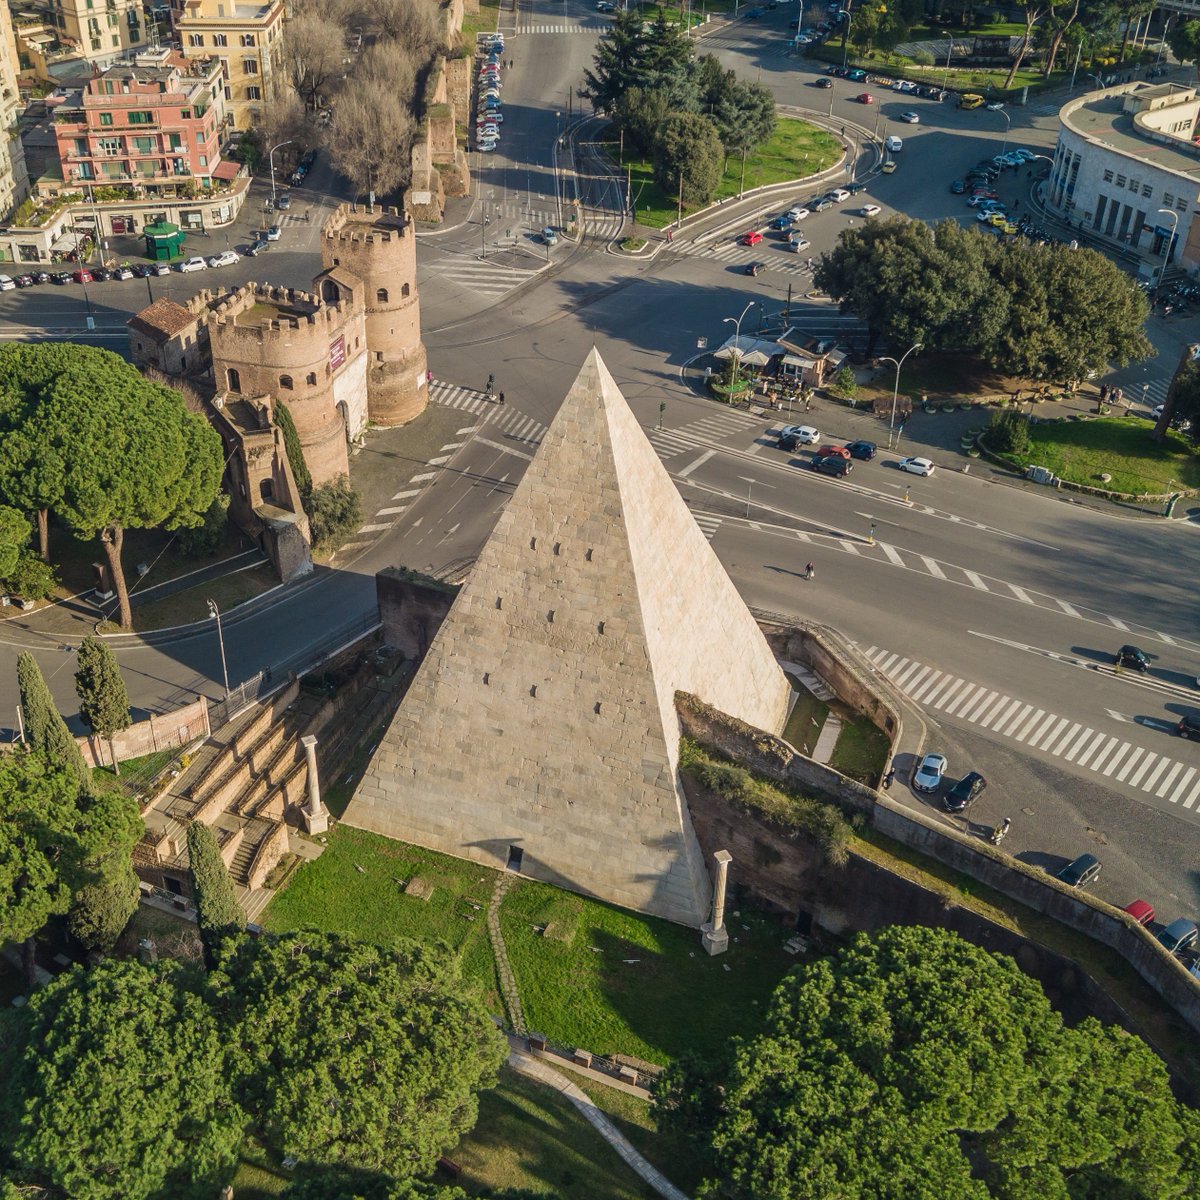 2. The Pyramid of Cestius Rome has an ancient pyramid. Egyptian forms (like obelisks) were once fashionable in the empire, particularly during the Augustus years. This 118-foot tomb was built for a Roman senator in c.12 BC.